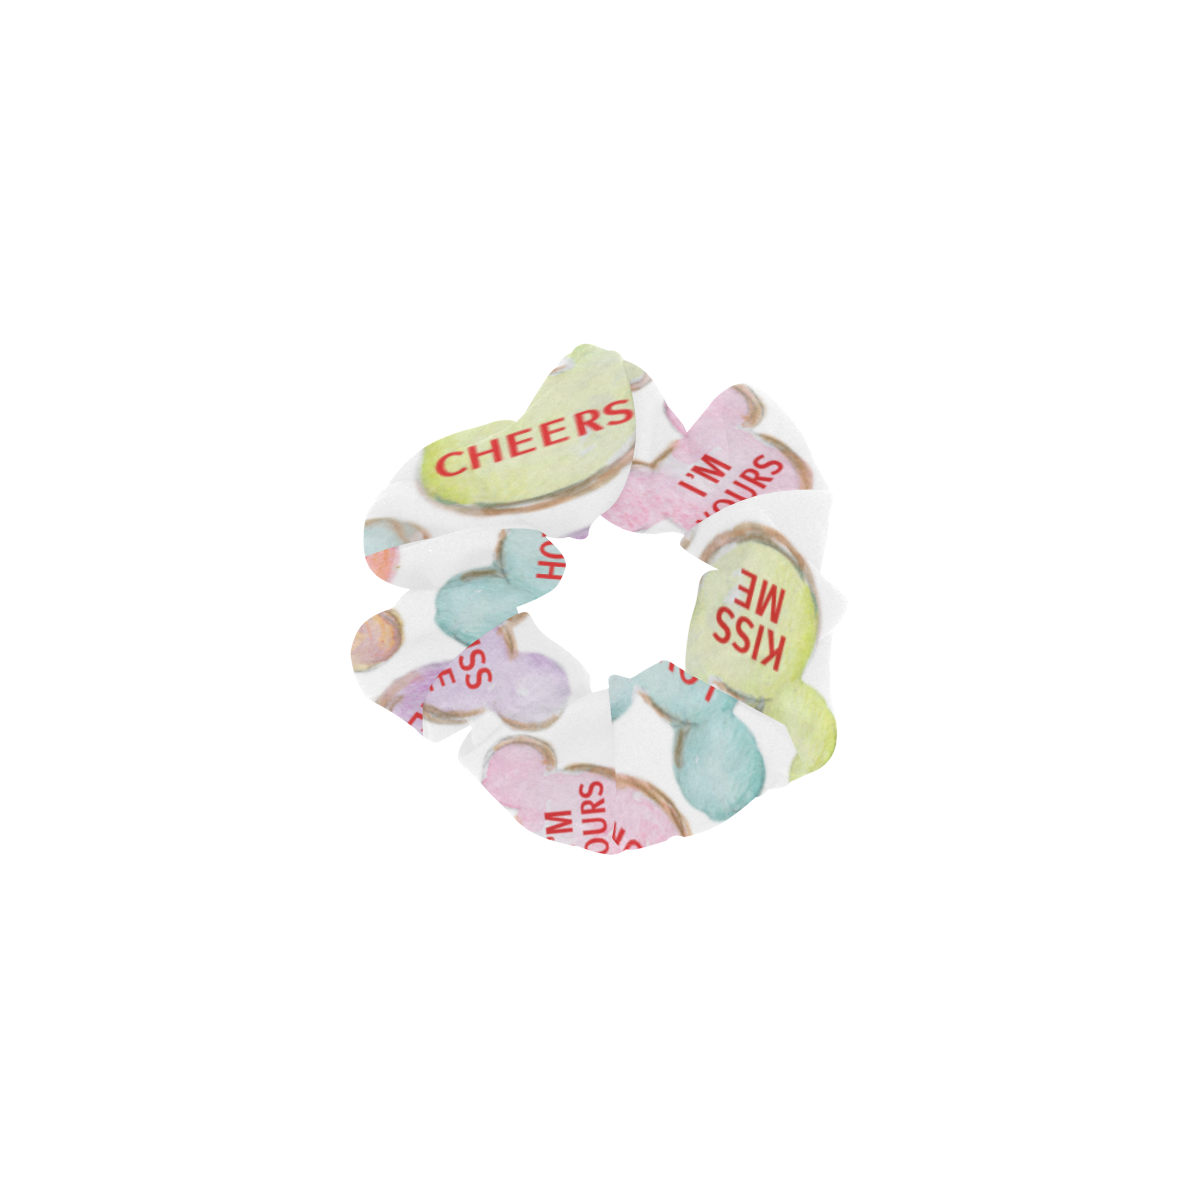 mickeylovecandyheartsclearhairtie All Over Print Hair Scrunchie